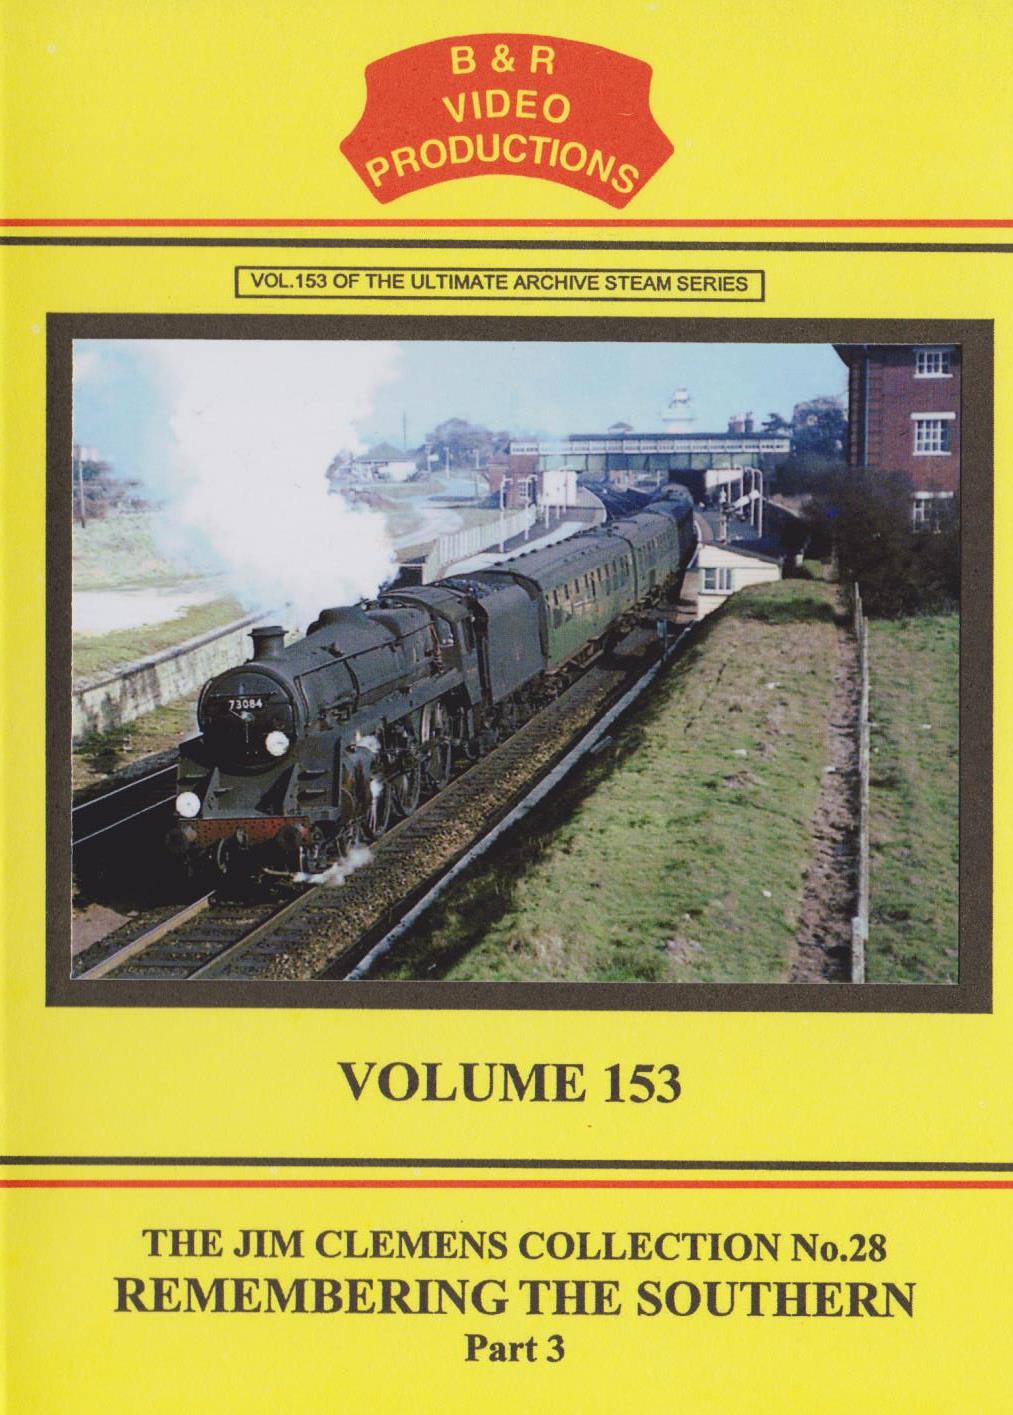 B & R Video Productions Vol 153 - The Jim Clemens collection No.28 Remembering the Southern Part 3 